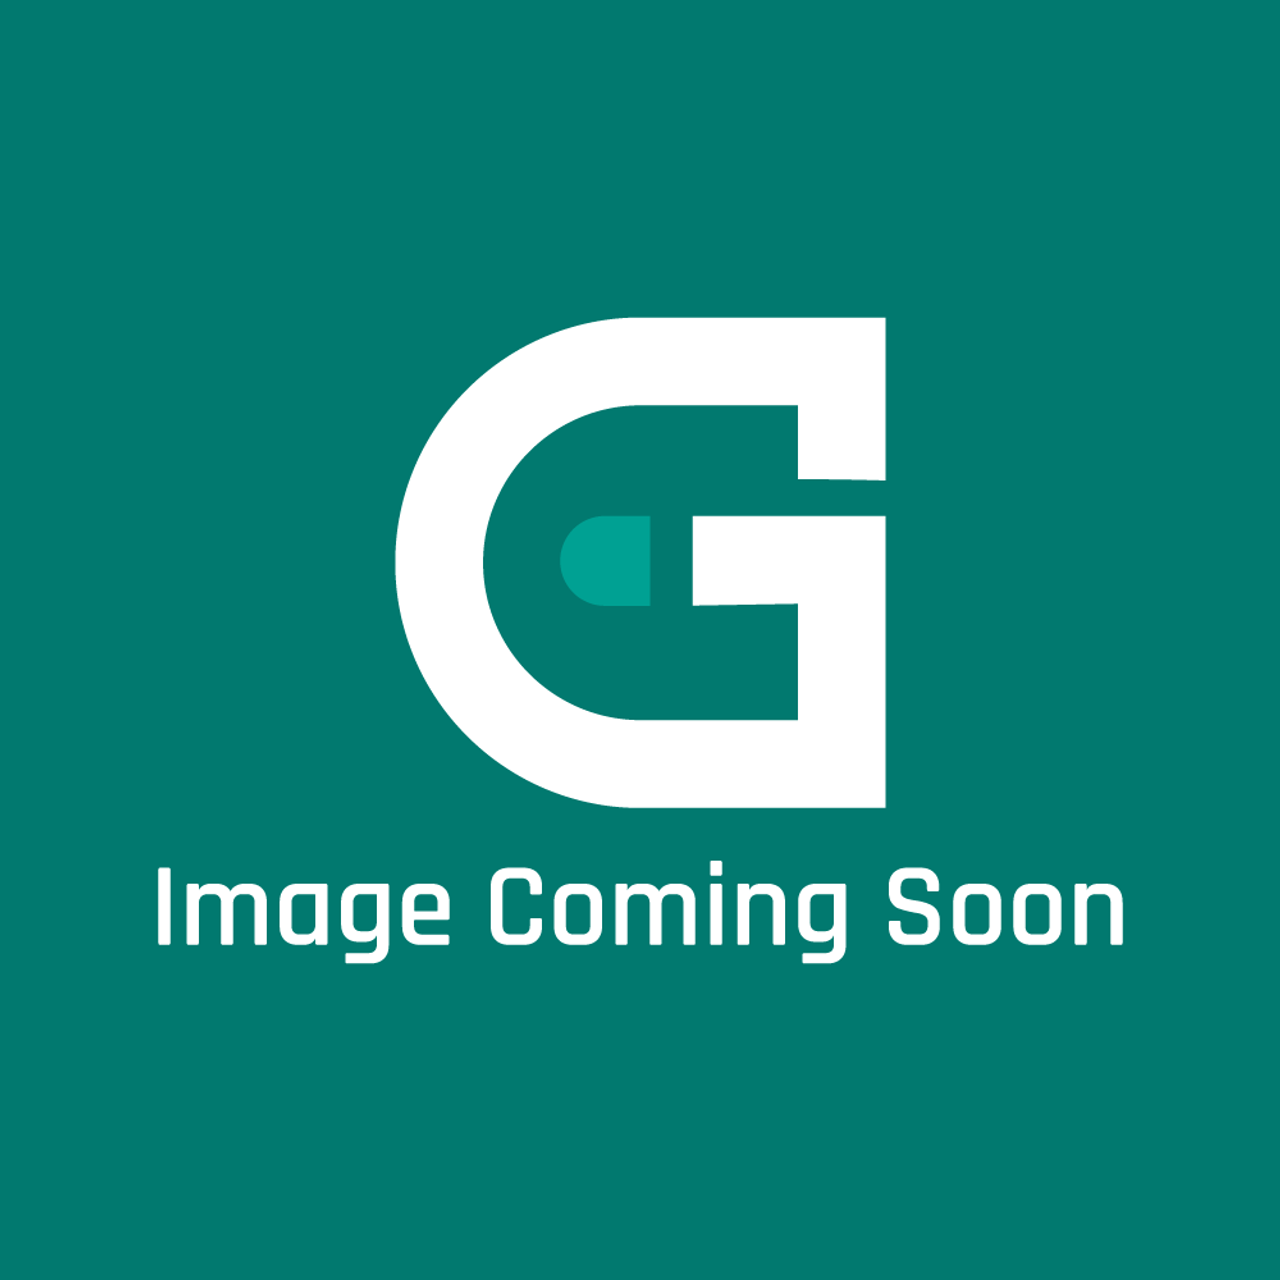 AGA Marvel A5185 - Cntrl Hsing Filler Pad Ec3 Lm - Image Coming Soon!